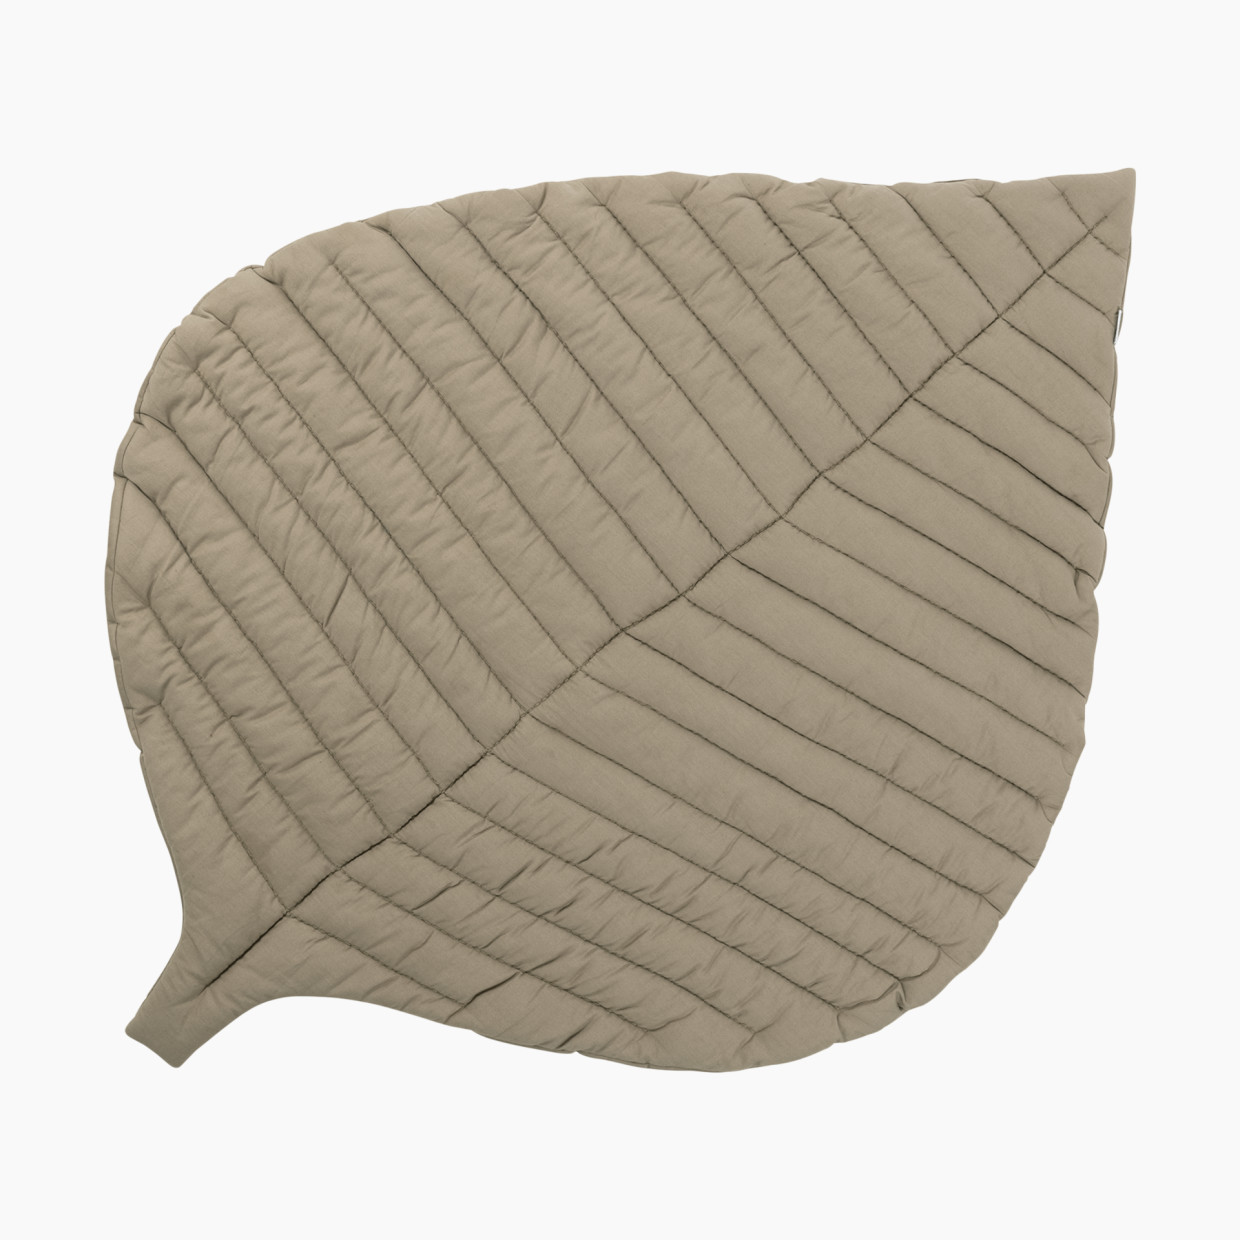 Toddlekind Organic Cotton Quilted Leaf Play Mat - Tan.